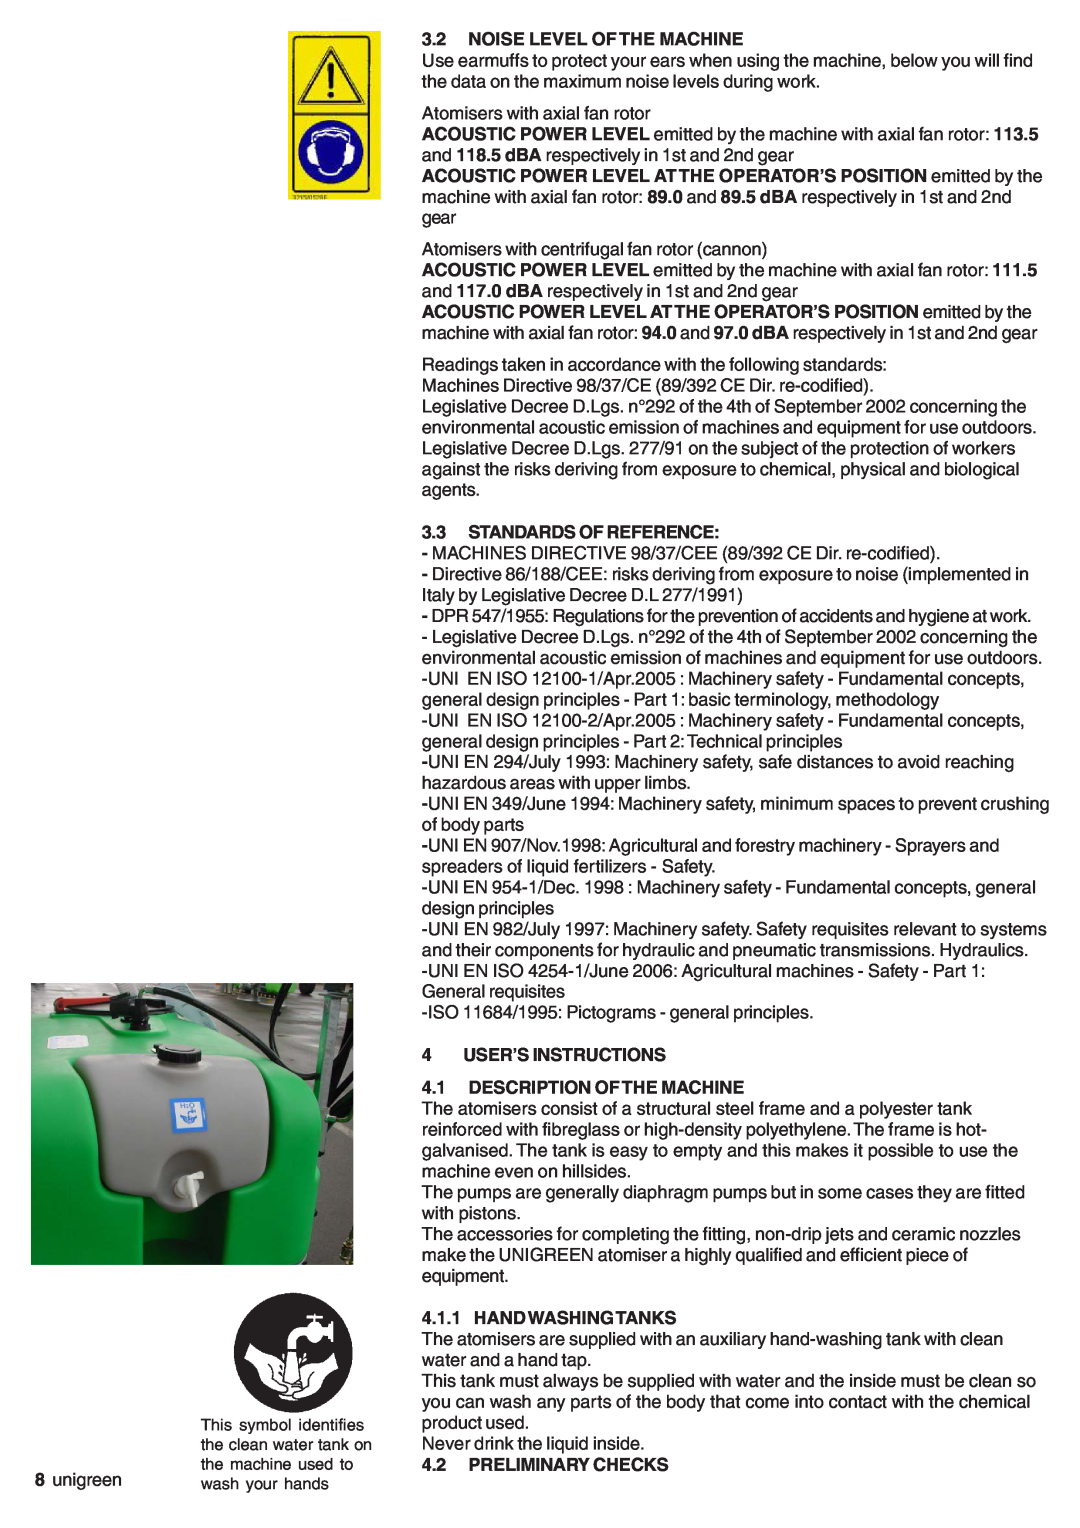 Unigreen DEVIL, SIRIO 3.2NOISE LEVEL OF THE MACHINE, 3.3STANDARDS OF REFERENCE, 4USER’S INSTRUCTIONS, Hand Washing Tanks 